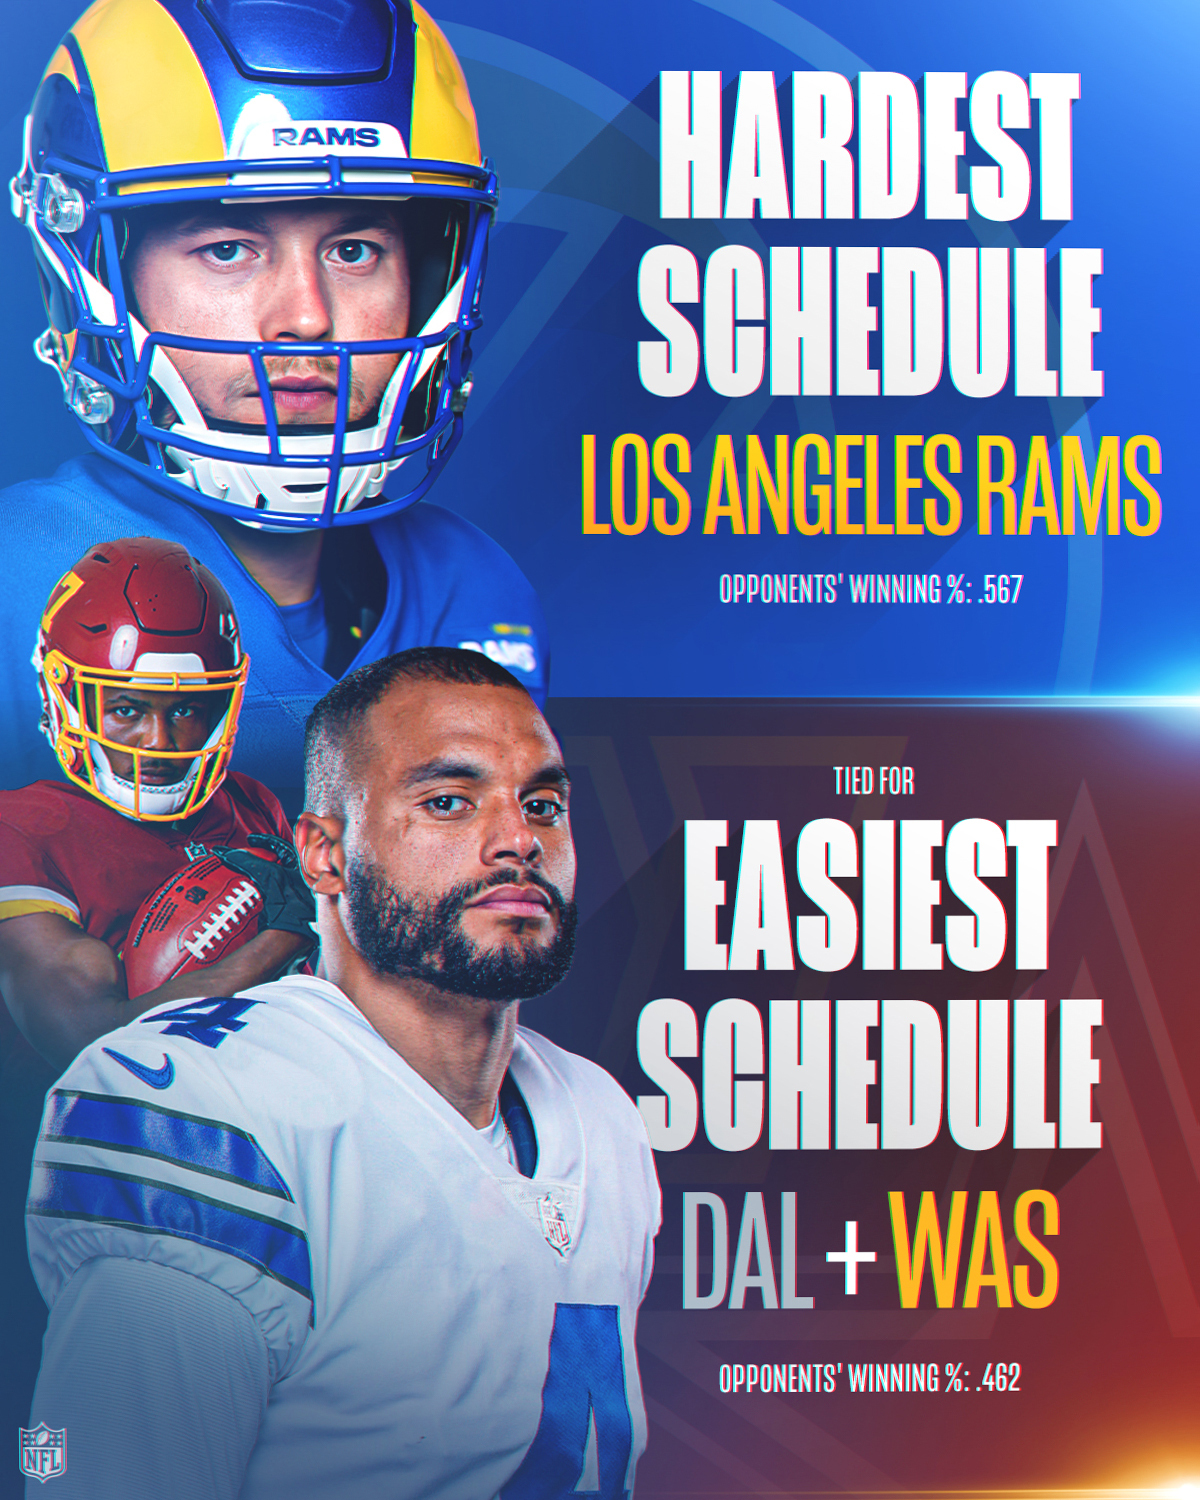 NFL on X: 'The hardest schedule vs. the easiest schedule. 